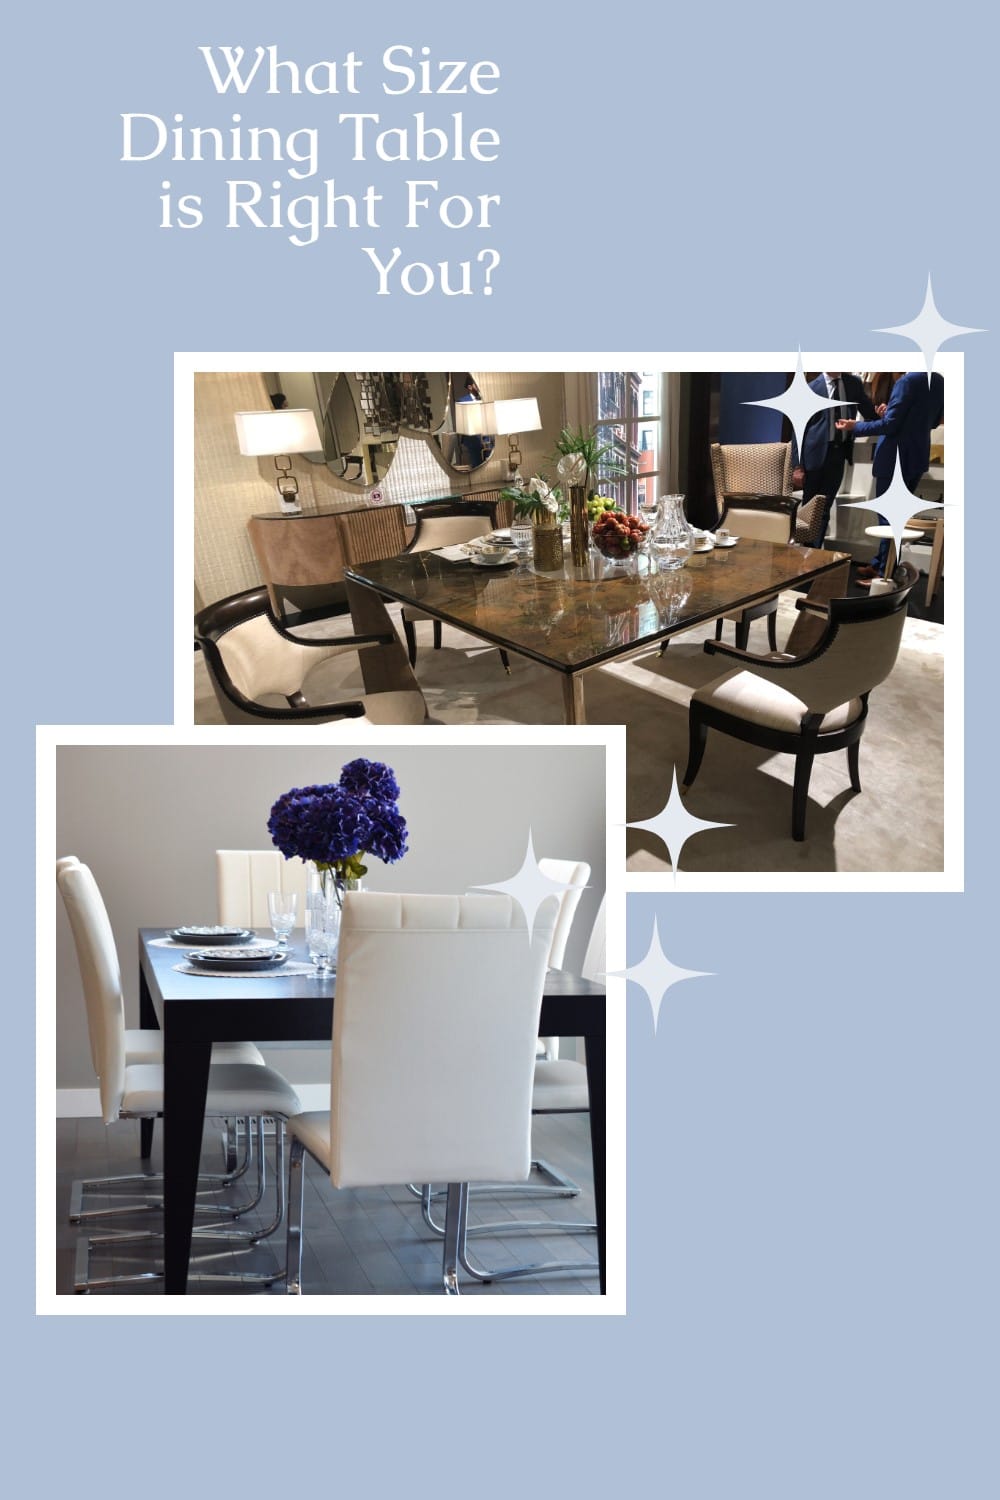 What is the perfect dining table dimension for your space? What shape should your dining table be? How many people are you wanting to seat? via @repurposedlife